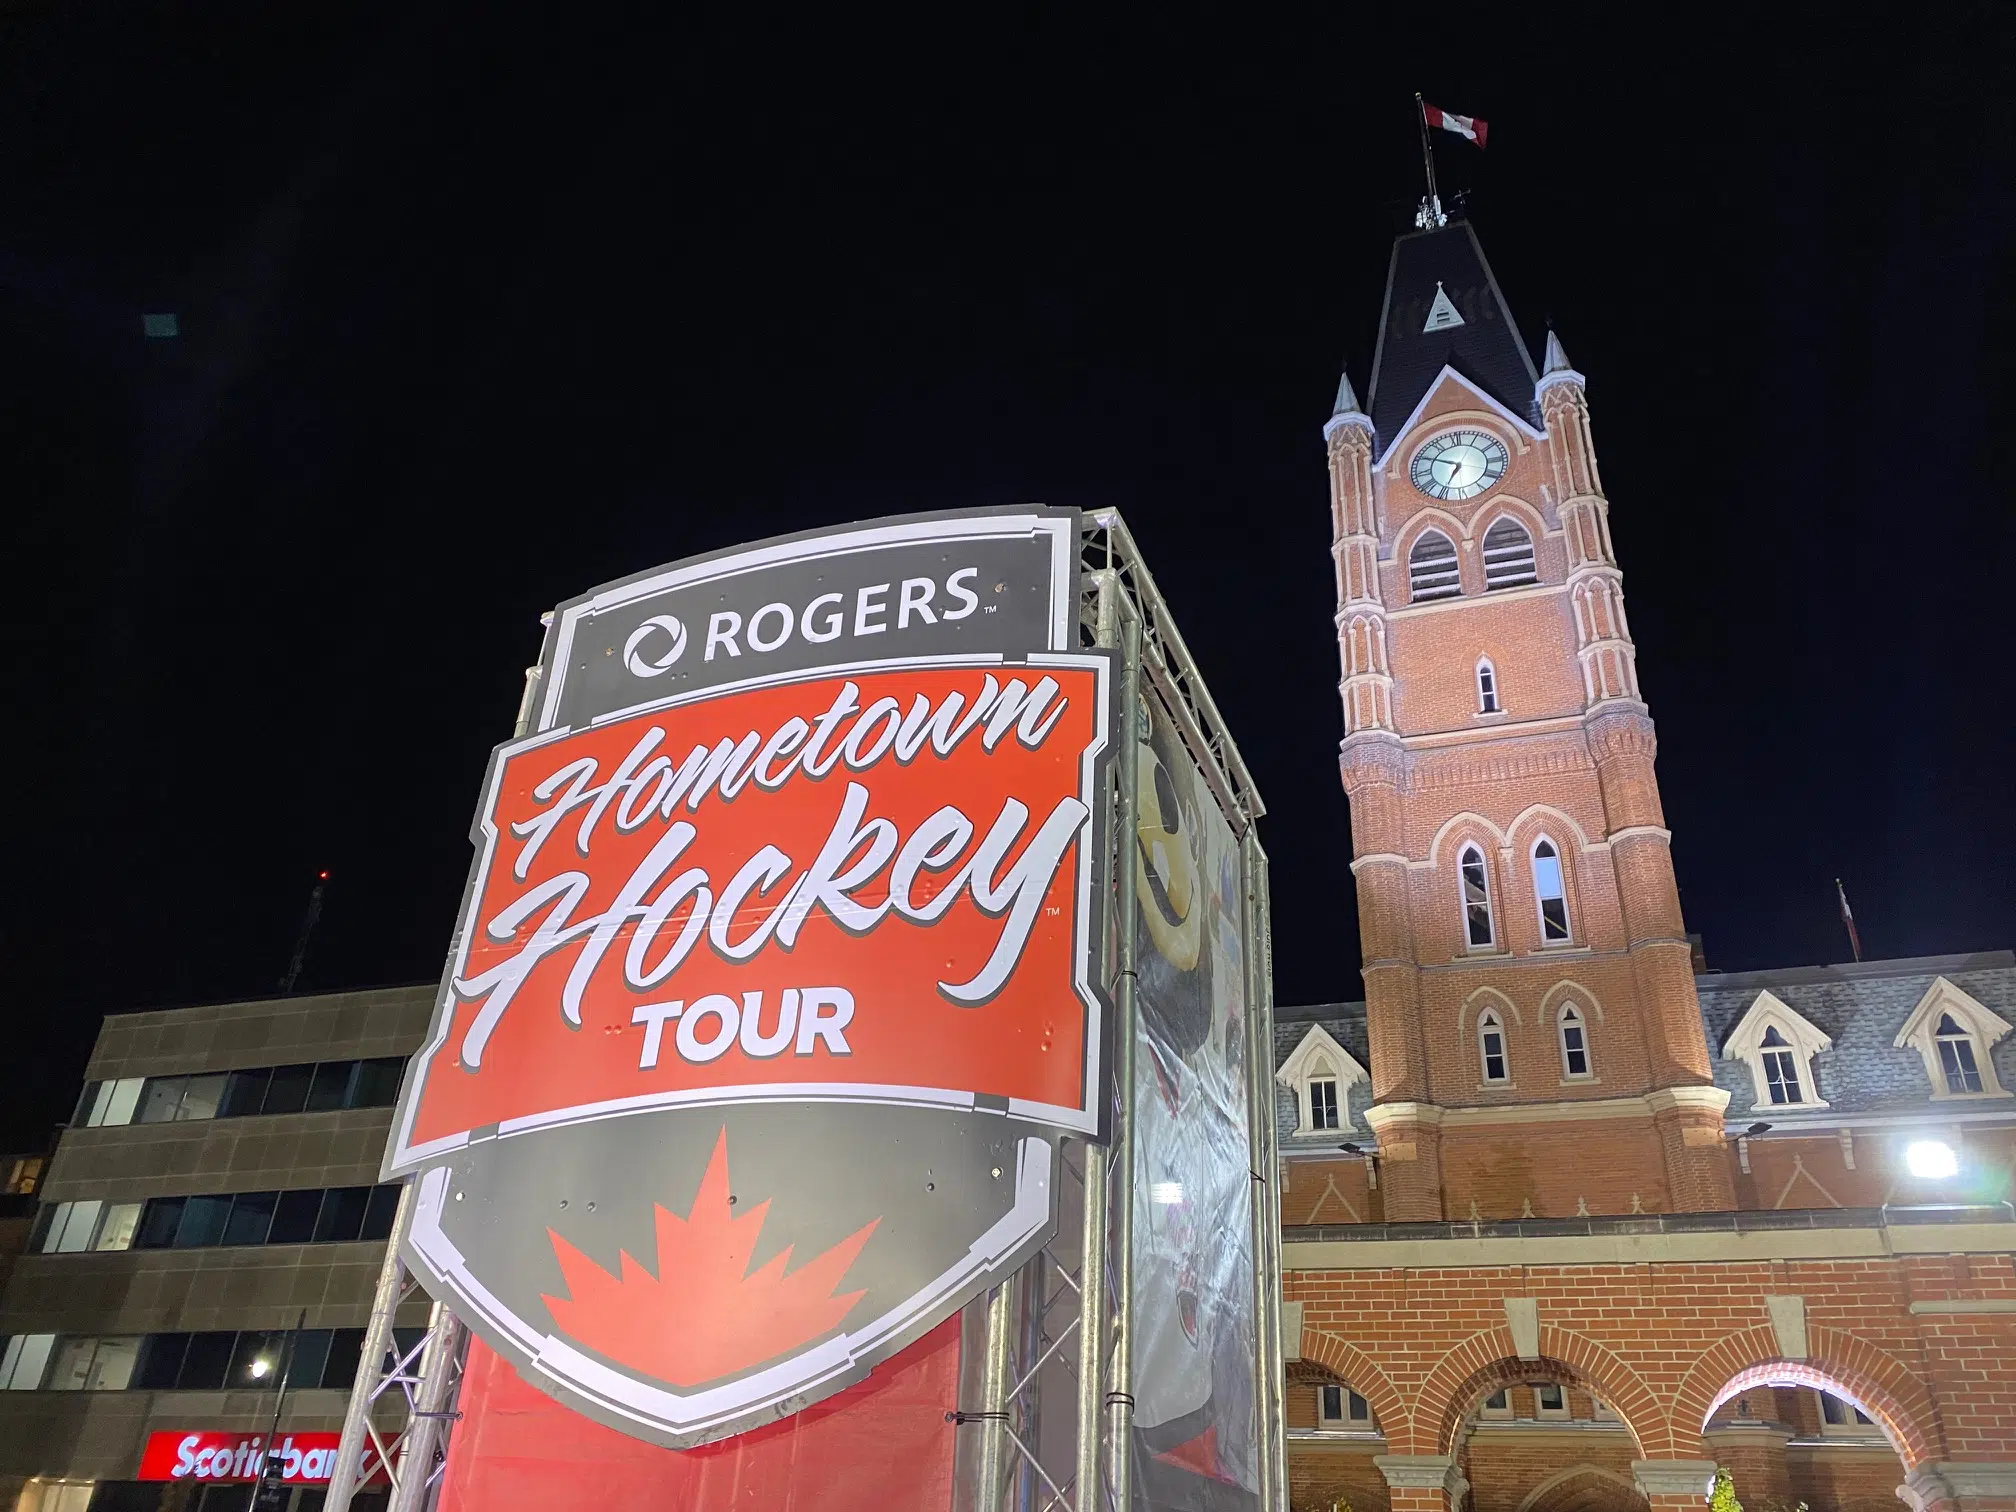 Fans brave chilly weather for second Rogers Hometown Hockey event in Belleville